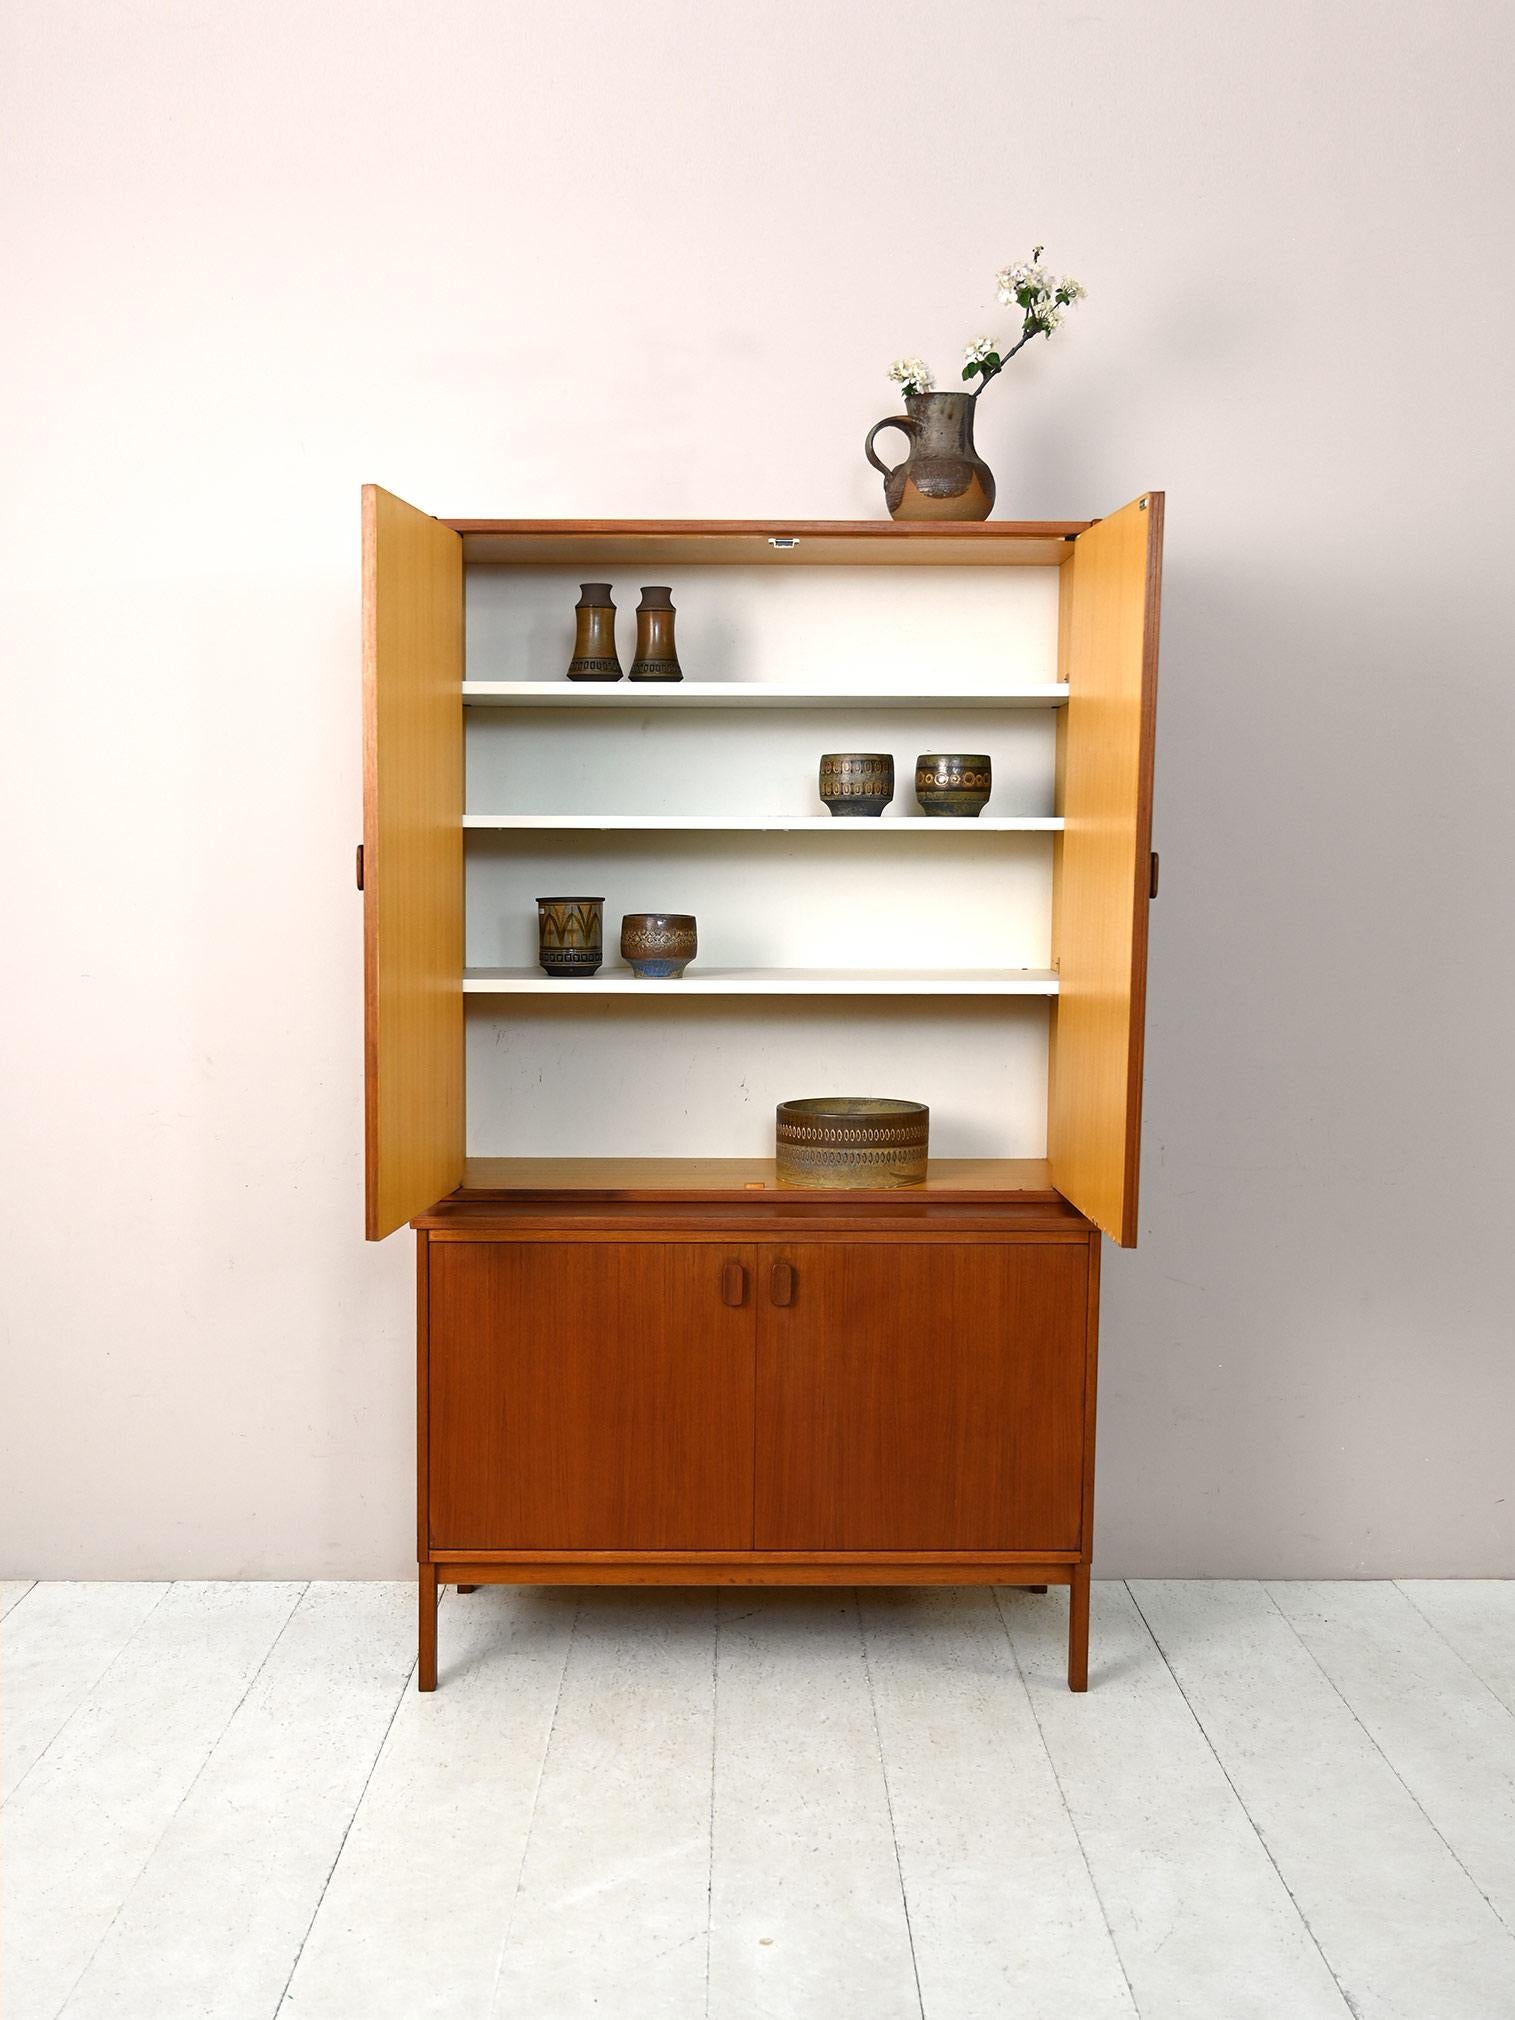 1960s cabinet of Scandinavian manufacture.

This sideboard of modest size turns out to be very capacious and functional. It consists of two parts, the bottom cabinet is a sideboard with a storage compartment equipped with shelves while the top part